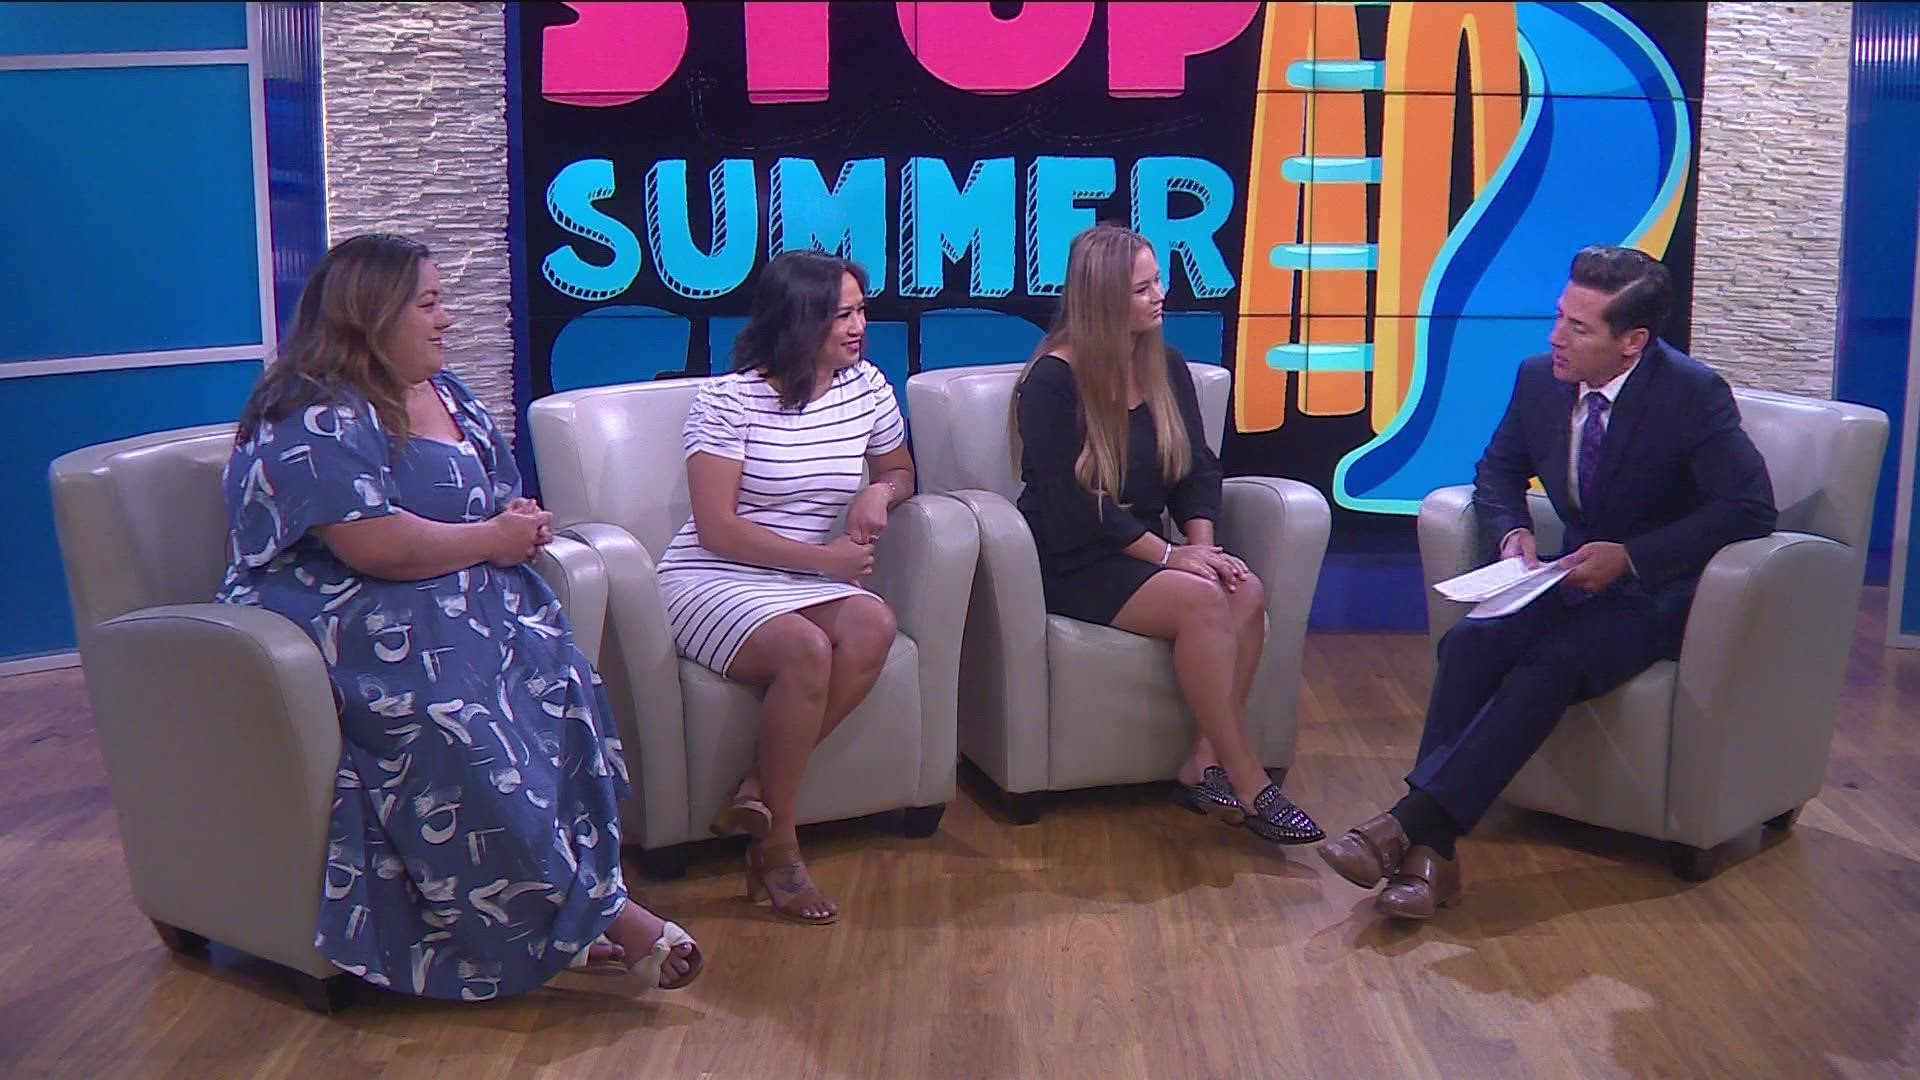 Counselors explain the summer slide phenomenon and what can be done to combat it.